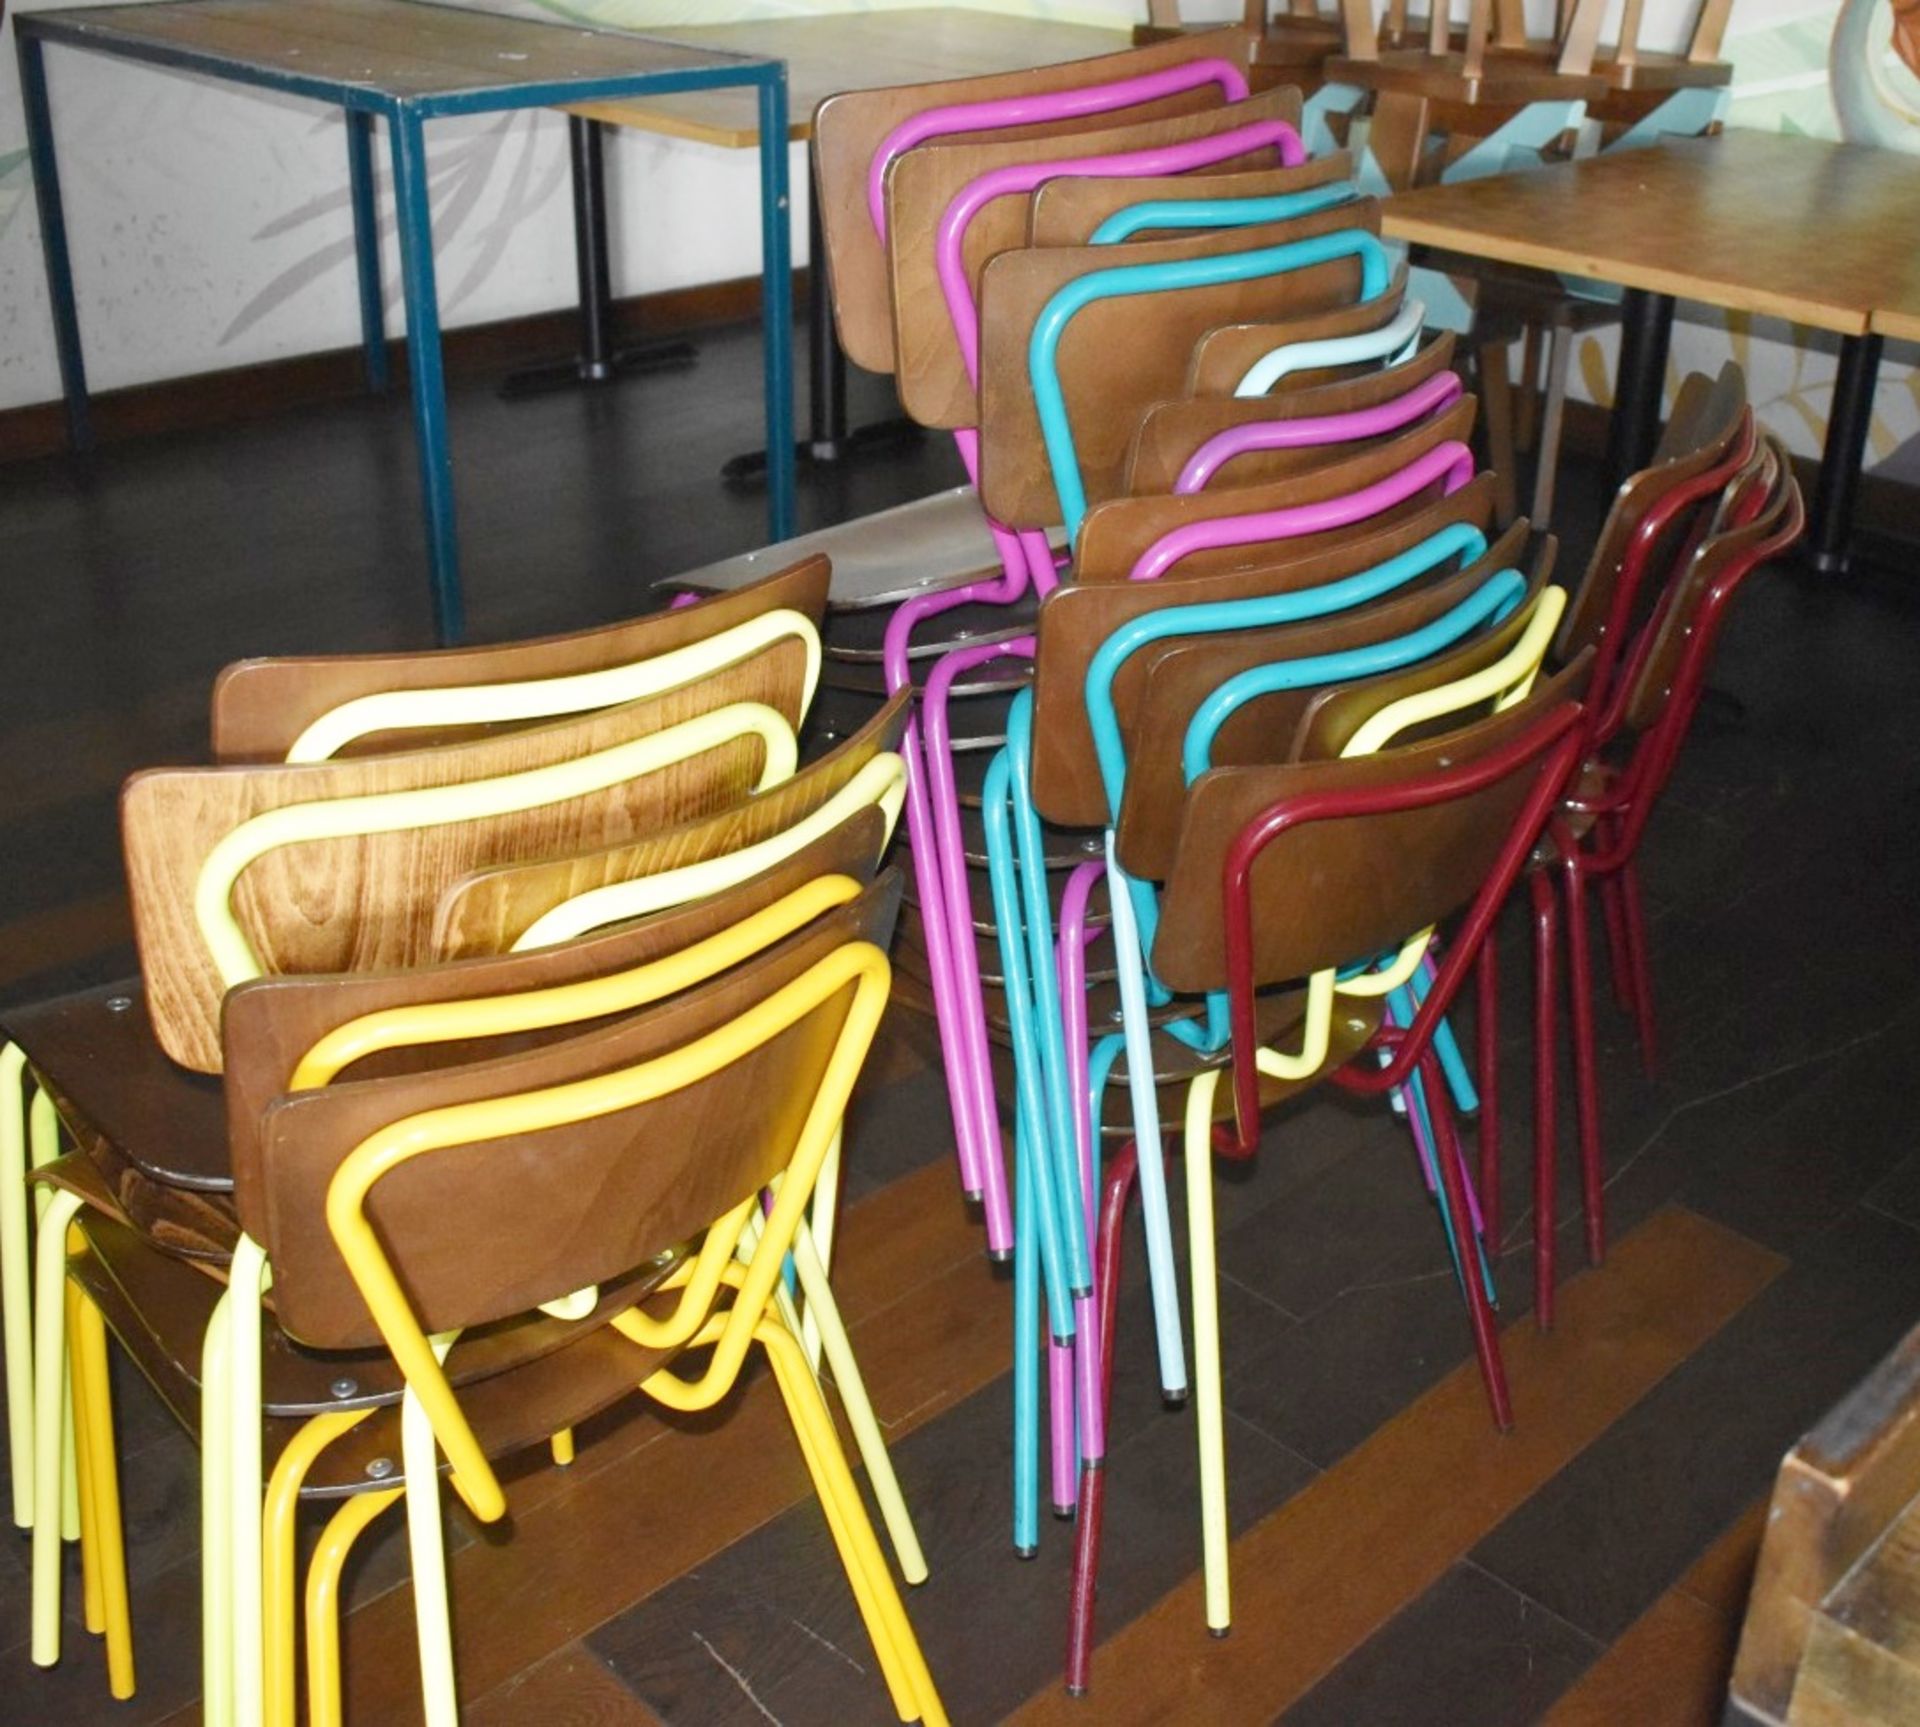 12 x Dining Chairs With Wooden Seats, Wooden Back Rests and Various Coloured Metal Frames - Ref: - Image 2 of 2